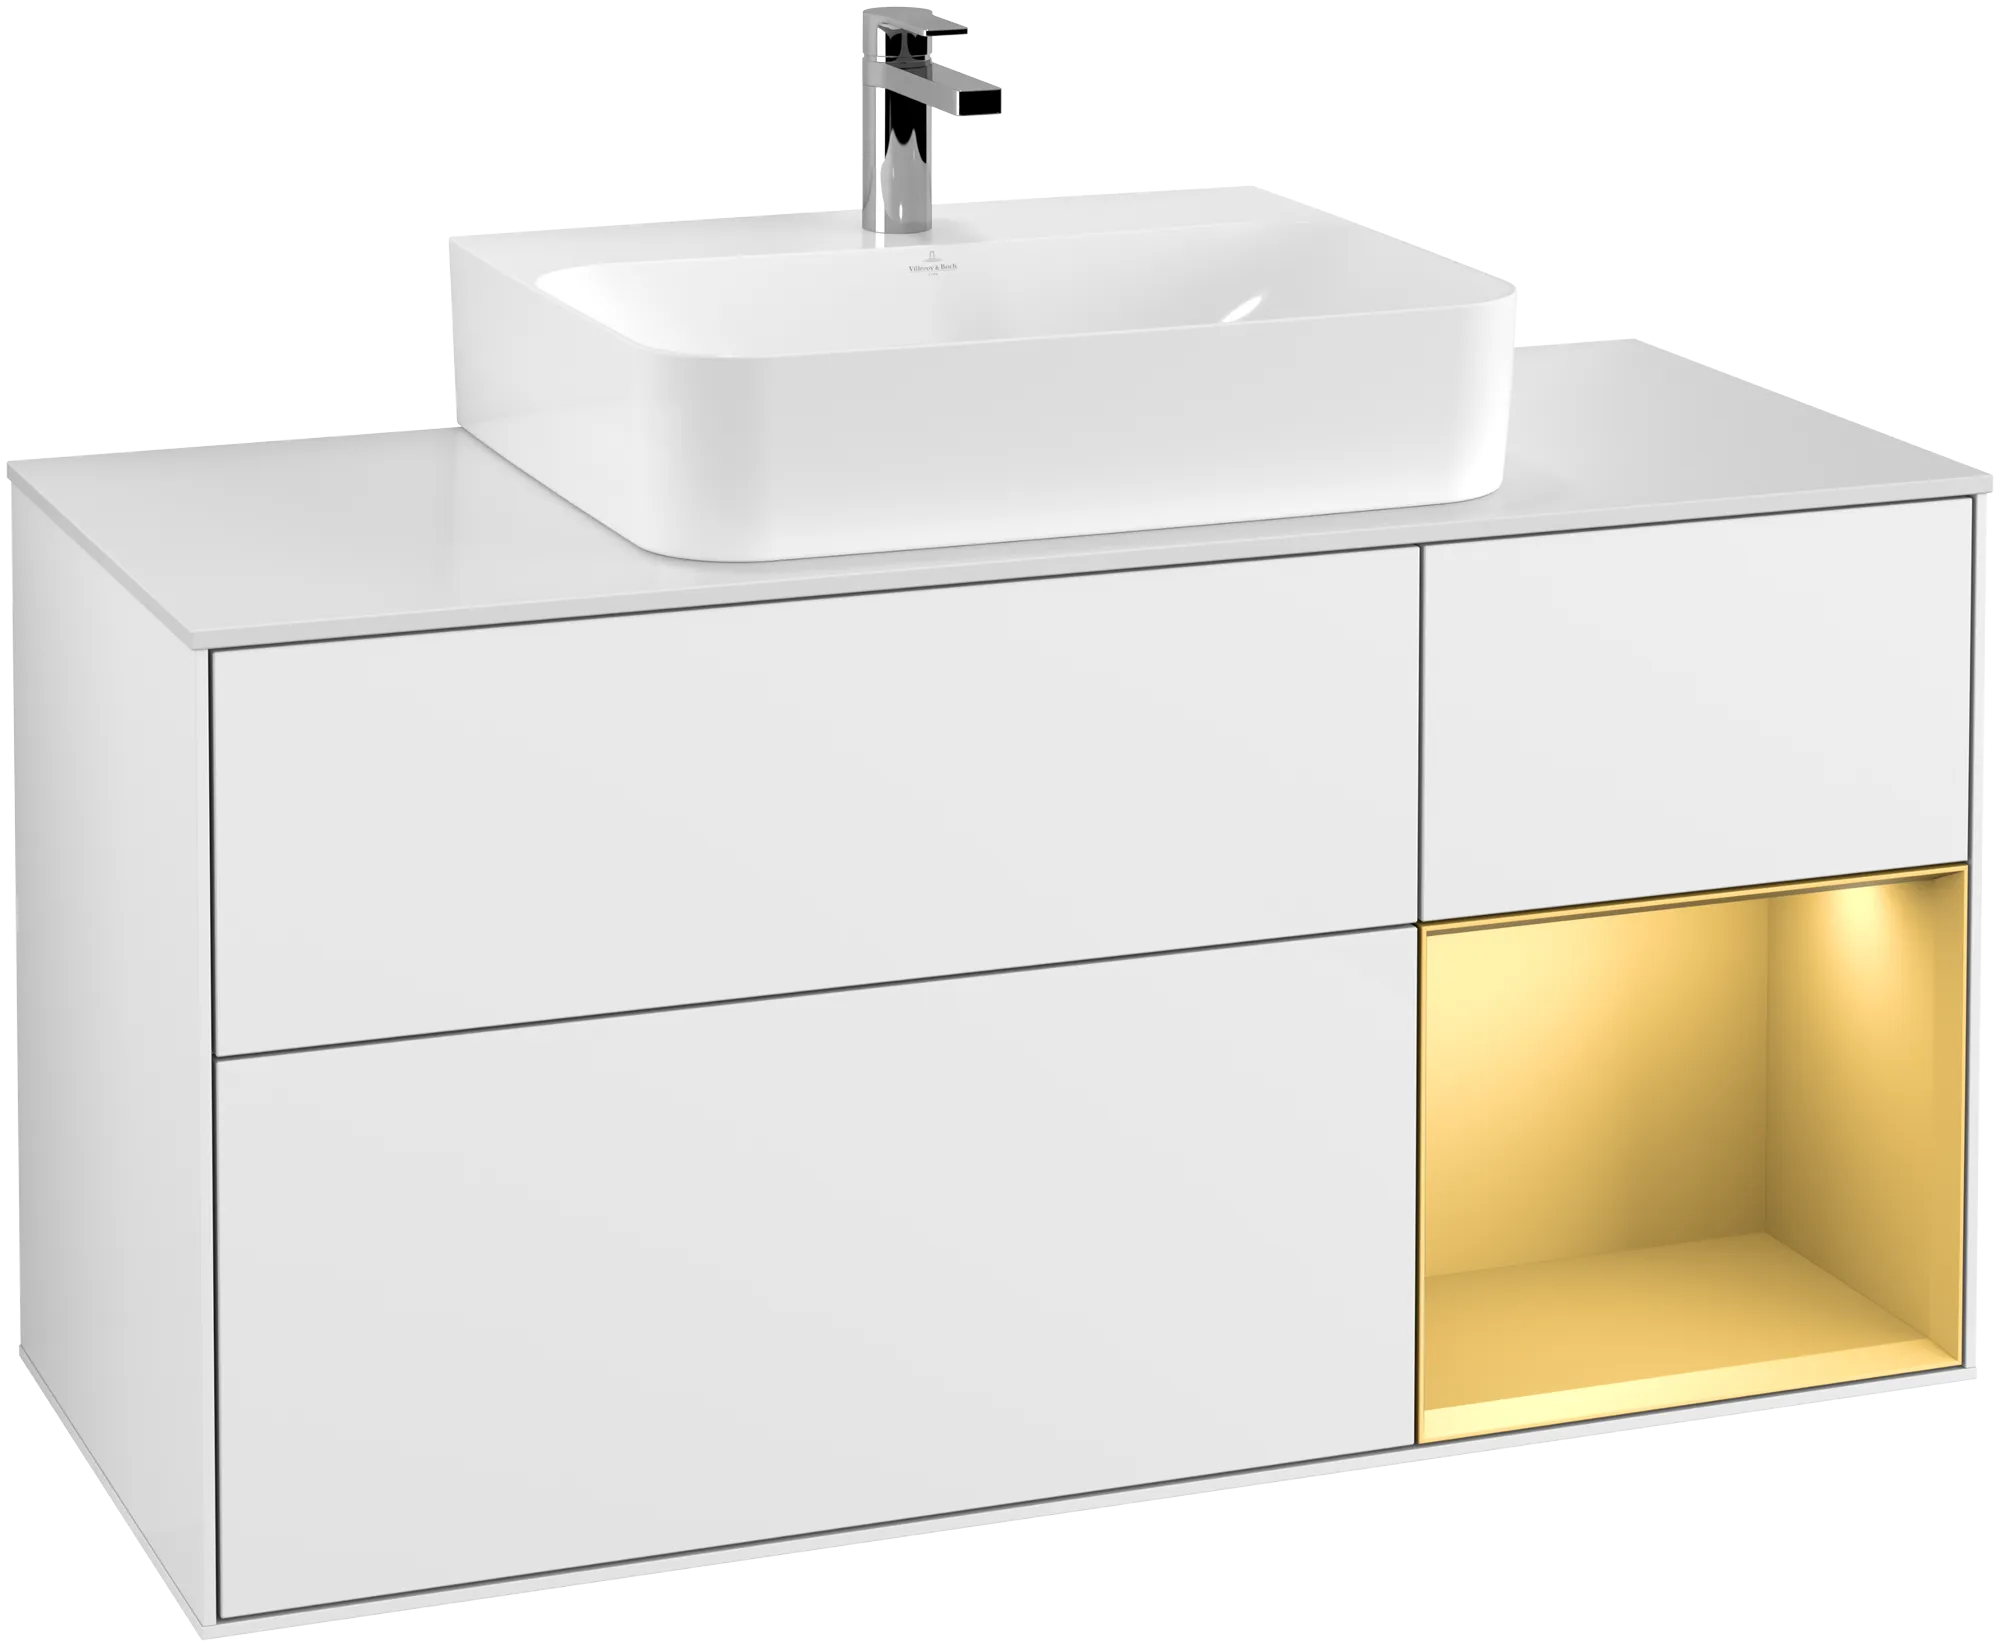 Obrázek VILLEROY BOCH Finion Vanity unit, with lighting, 3 pull-out compartments, 1200 x 603 x 501 mm, Glossy White Lacquer / Gold Matt Lacquer / Glass White Matt #G171HFGF